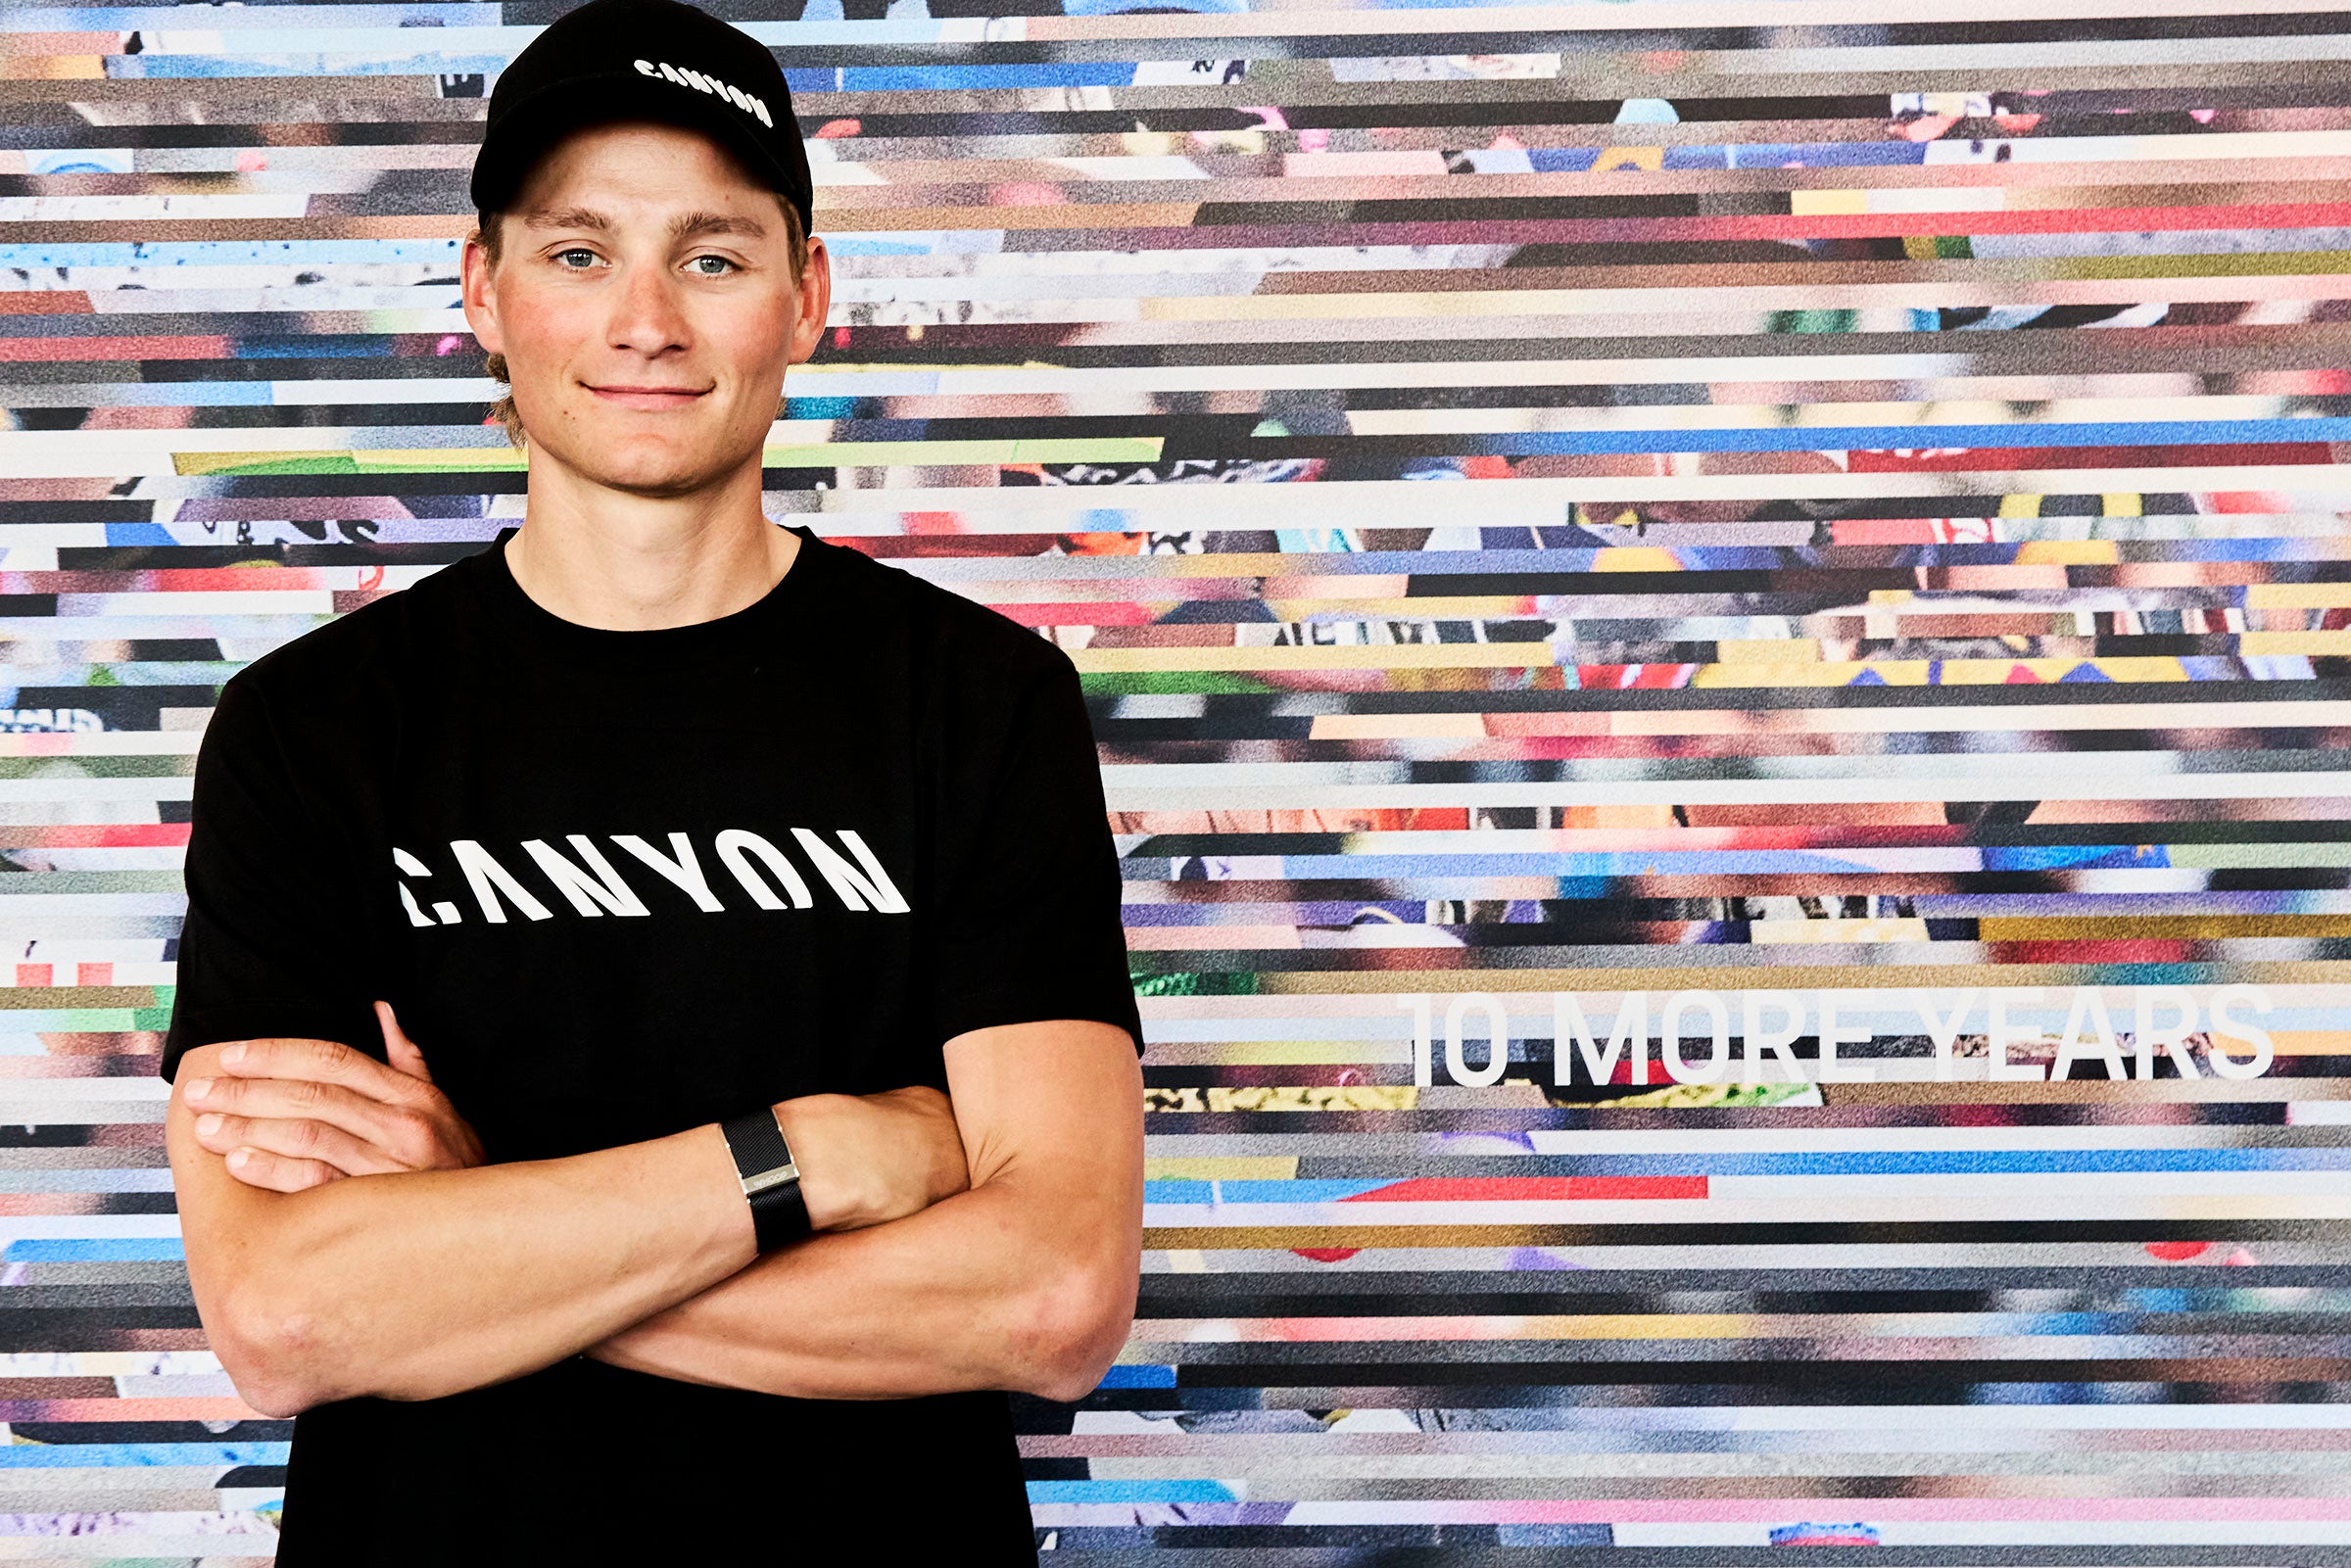 Mathieu van der Poel has signed a long-term contract with Canyon